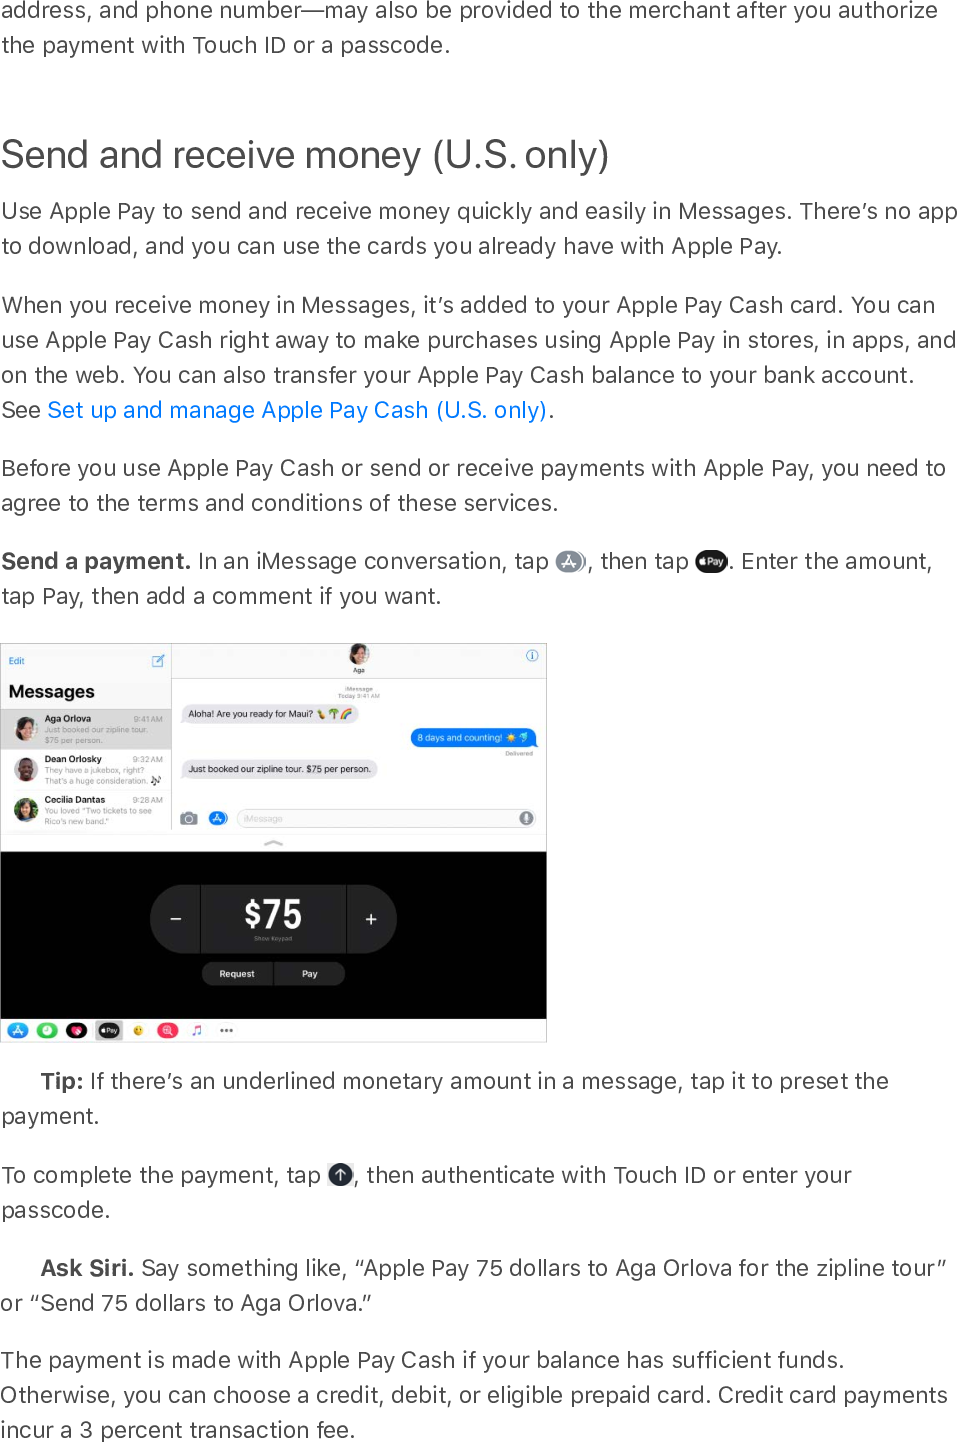 address, and phone number—may also be provided to the merchant after you authorizethe payment with Touch ID or a passcode.Send and receive money (U.S. only)Use Apple Pay to send and receive money quickly and easily in Messages. Thereʼs no appto download, and you can use the cards you already have with Apple Pay.When you receive money in Messages, itʼs added to your Apple Pay Cash card. You canuse Apple Pay Cash right away to make purchases using Apple Pay in stores, in apps, andon the web. You can also transfer your Apple Pay Cash balance to your bank account.See  .Before you use Apple Pay Cash or send or receive payments with Apple Pay, you need toagree to the terms and conditions of these services.Send a payment. In an iMessage conversation, tap  , then tap  . Enter the amount,tap Pay, then add a comment if you want.Tip: If thereʼs an underlined monetary amount in a message, tap it to preset thepayment.To complete the payment, tap  , then authenticate with Touch ID or enter yourpasscode.Ask Siri. Say something like, “Apple Pay 75 dollars to Aga Orlova for the zipline tour ”or “Send 75 dollars to Aga Orlova.”The payment is made with Apple Pay Cash if your balance has sufficient funds.Otherwise, you can choose a credit, debit, or eligible prepaid card. Credit card paymentsincur a 3 percent transaction fee.Set up and manage Apple Pay Cash (U.S. only)